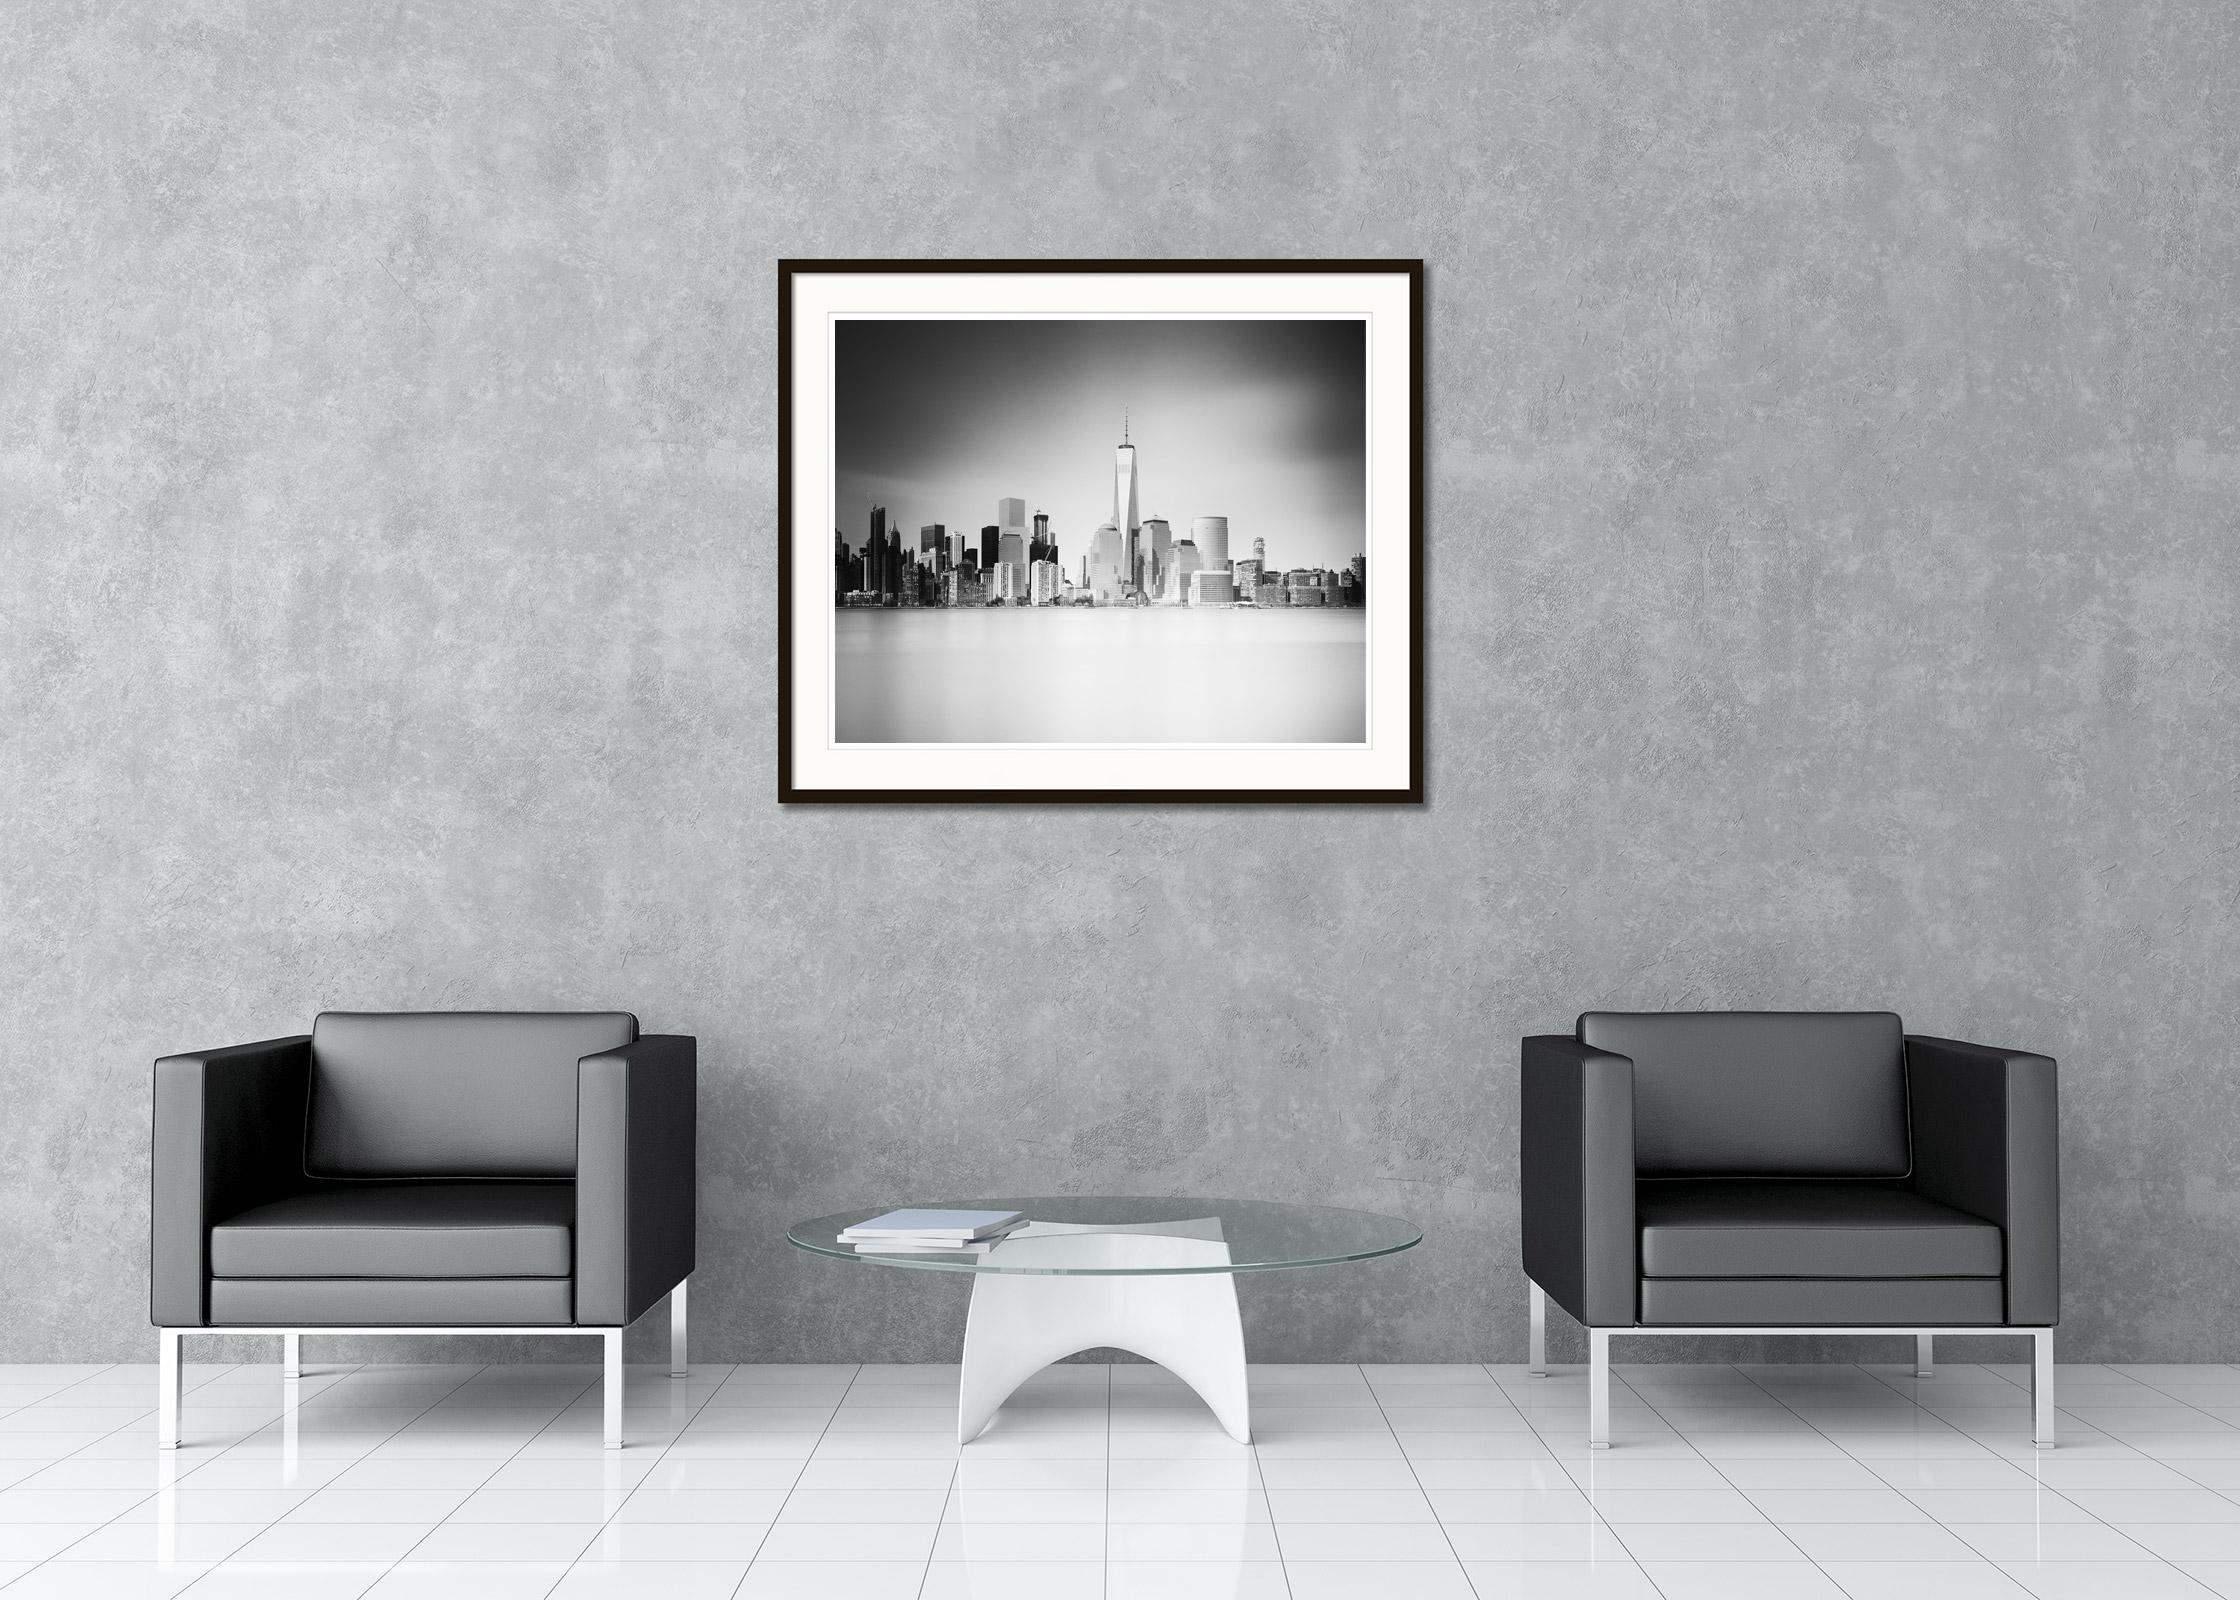 Black and white fine art long exposure cityscape - landscape photography. Archival pigment ink print as part of a limited edition of 20. All Gerald Berghammer prints are made to order in limited editions on Hahnemuehle Photo Rag Baryta. Each print